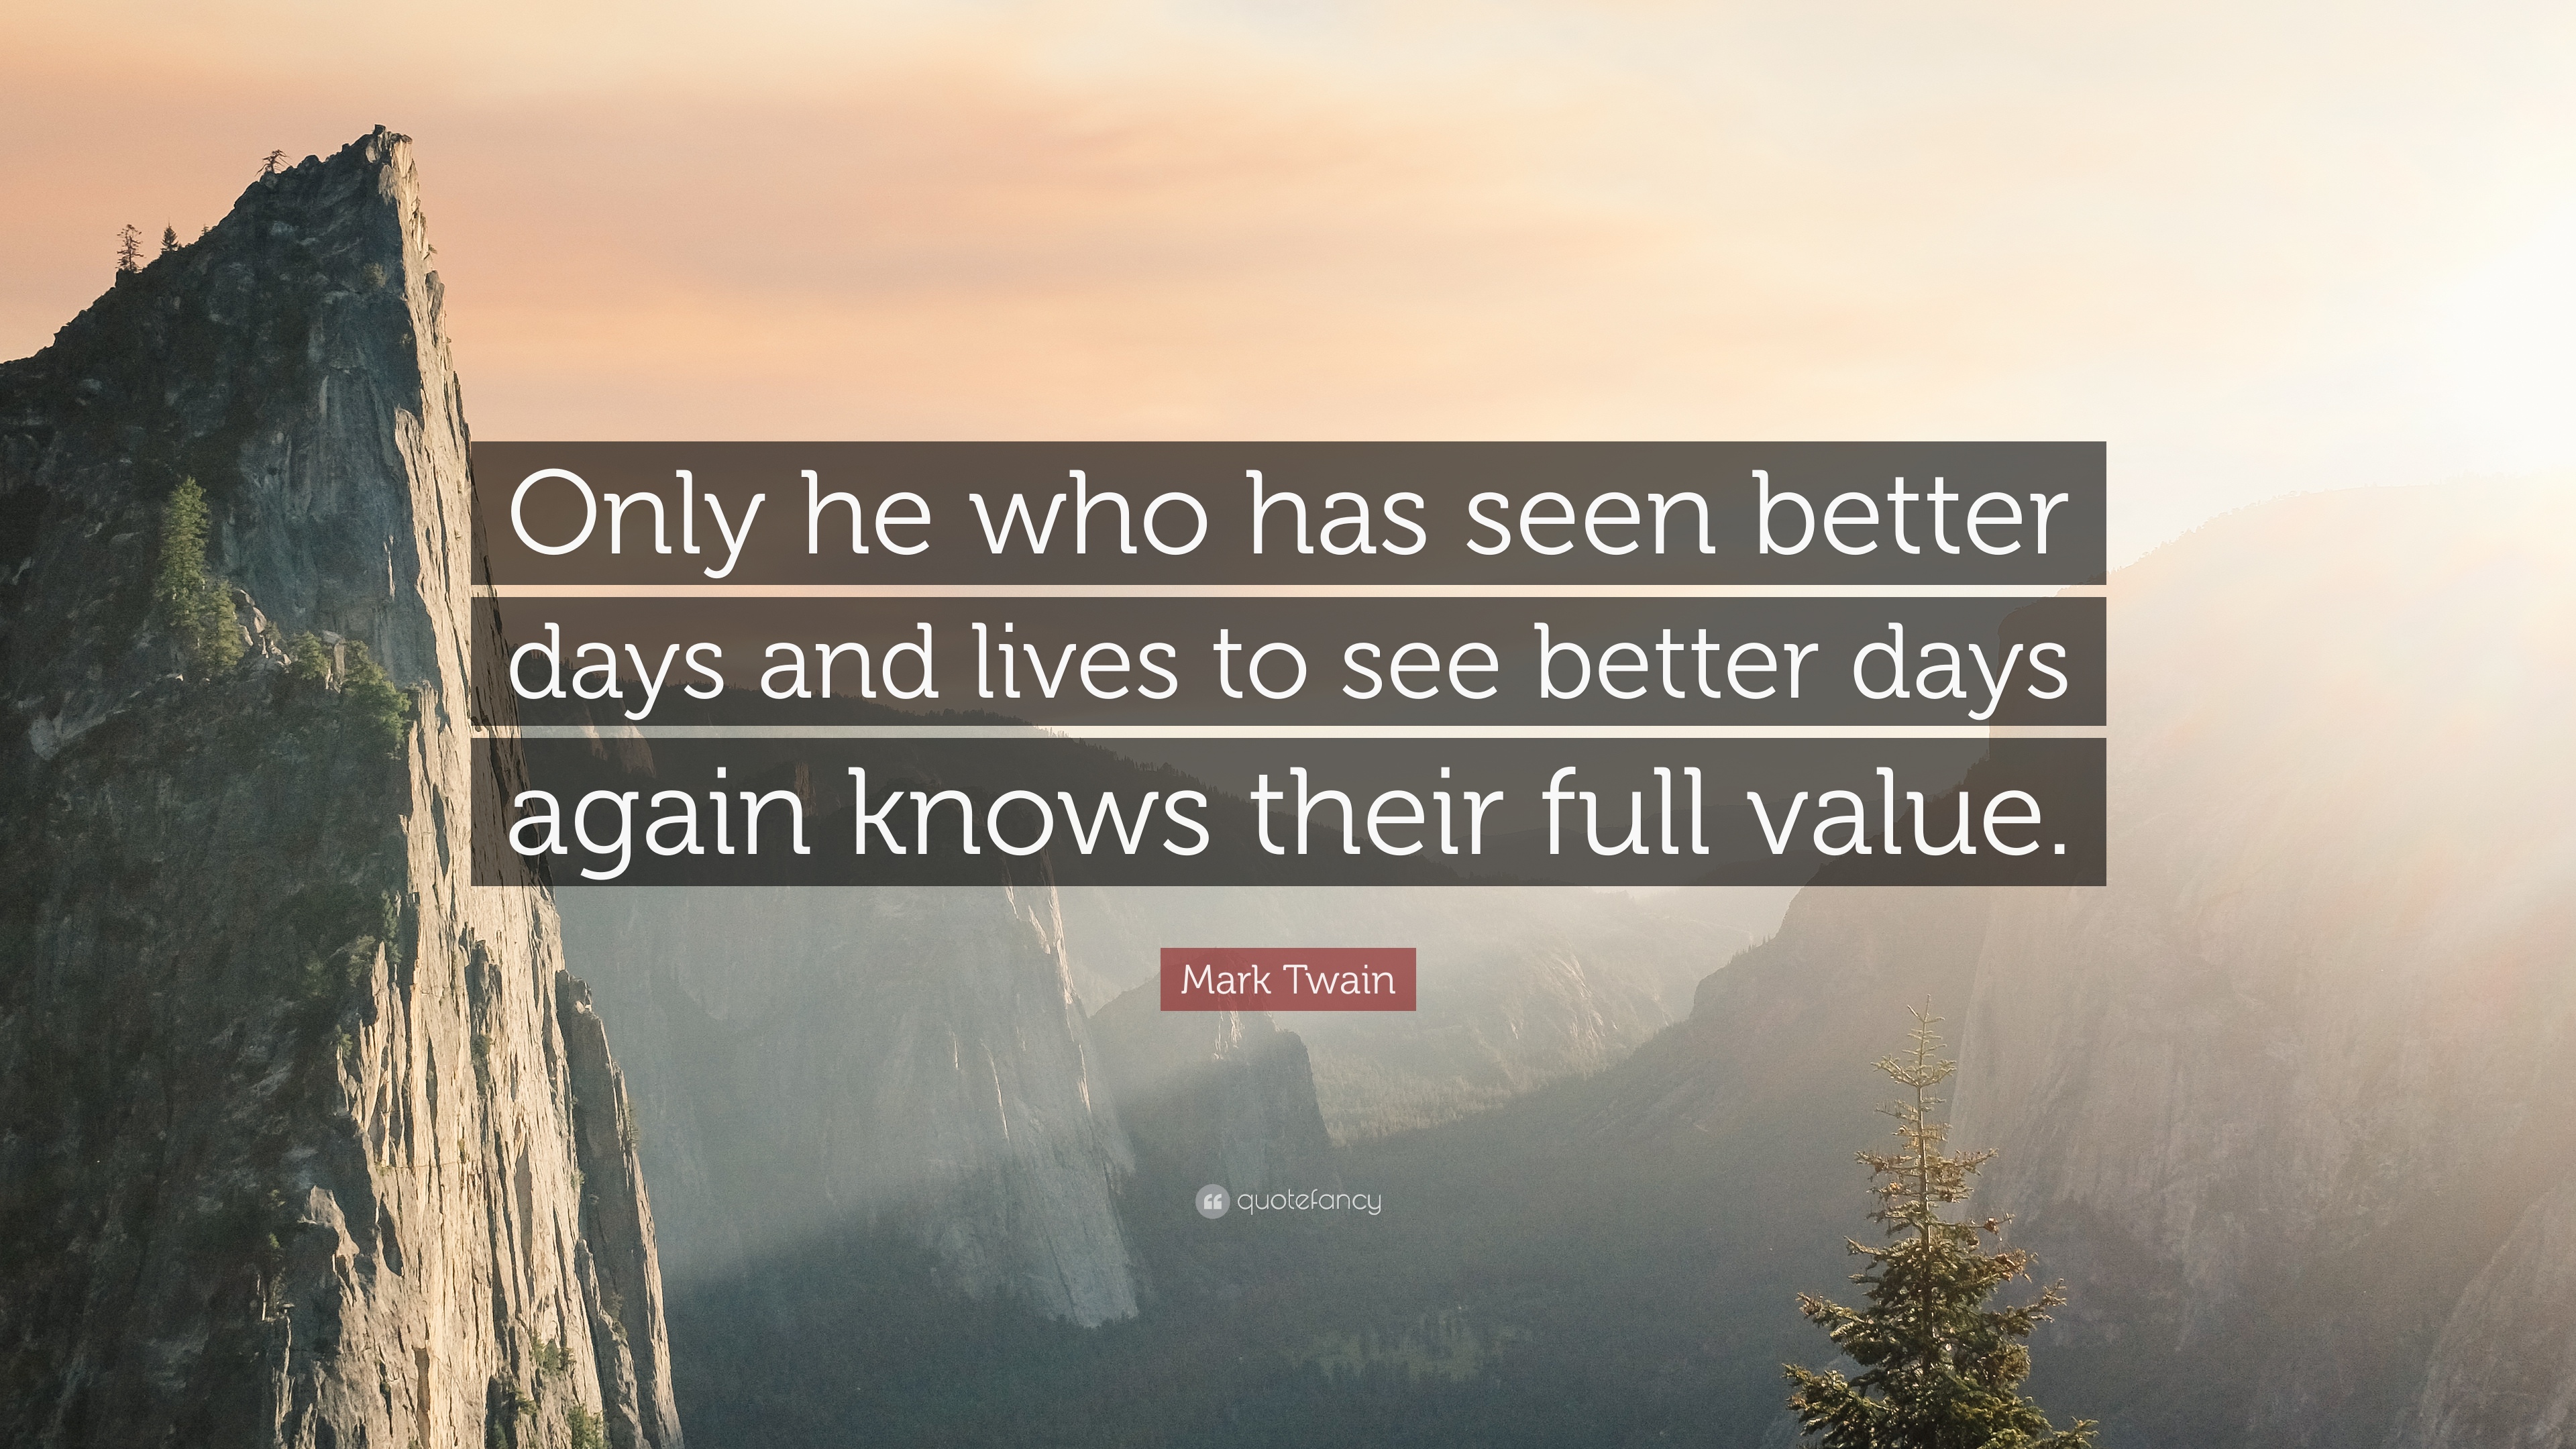 Mark Twain Quote: “Only he who has seen better days and lives to see ...